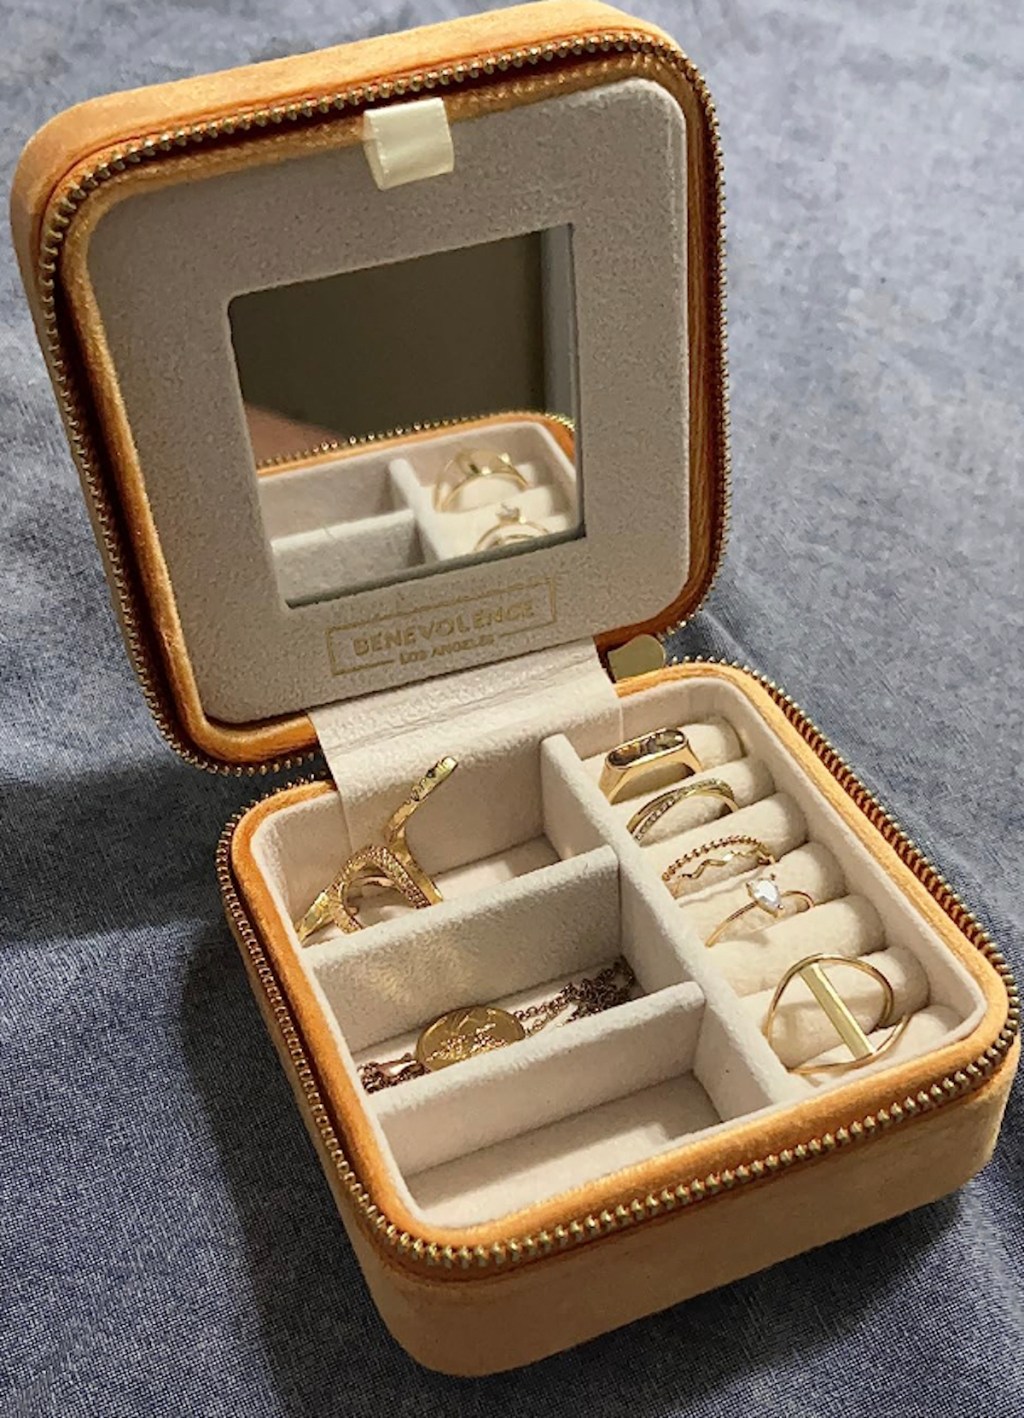 camel colored travel jewelry box organizer with gold jewelry inside